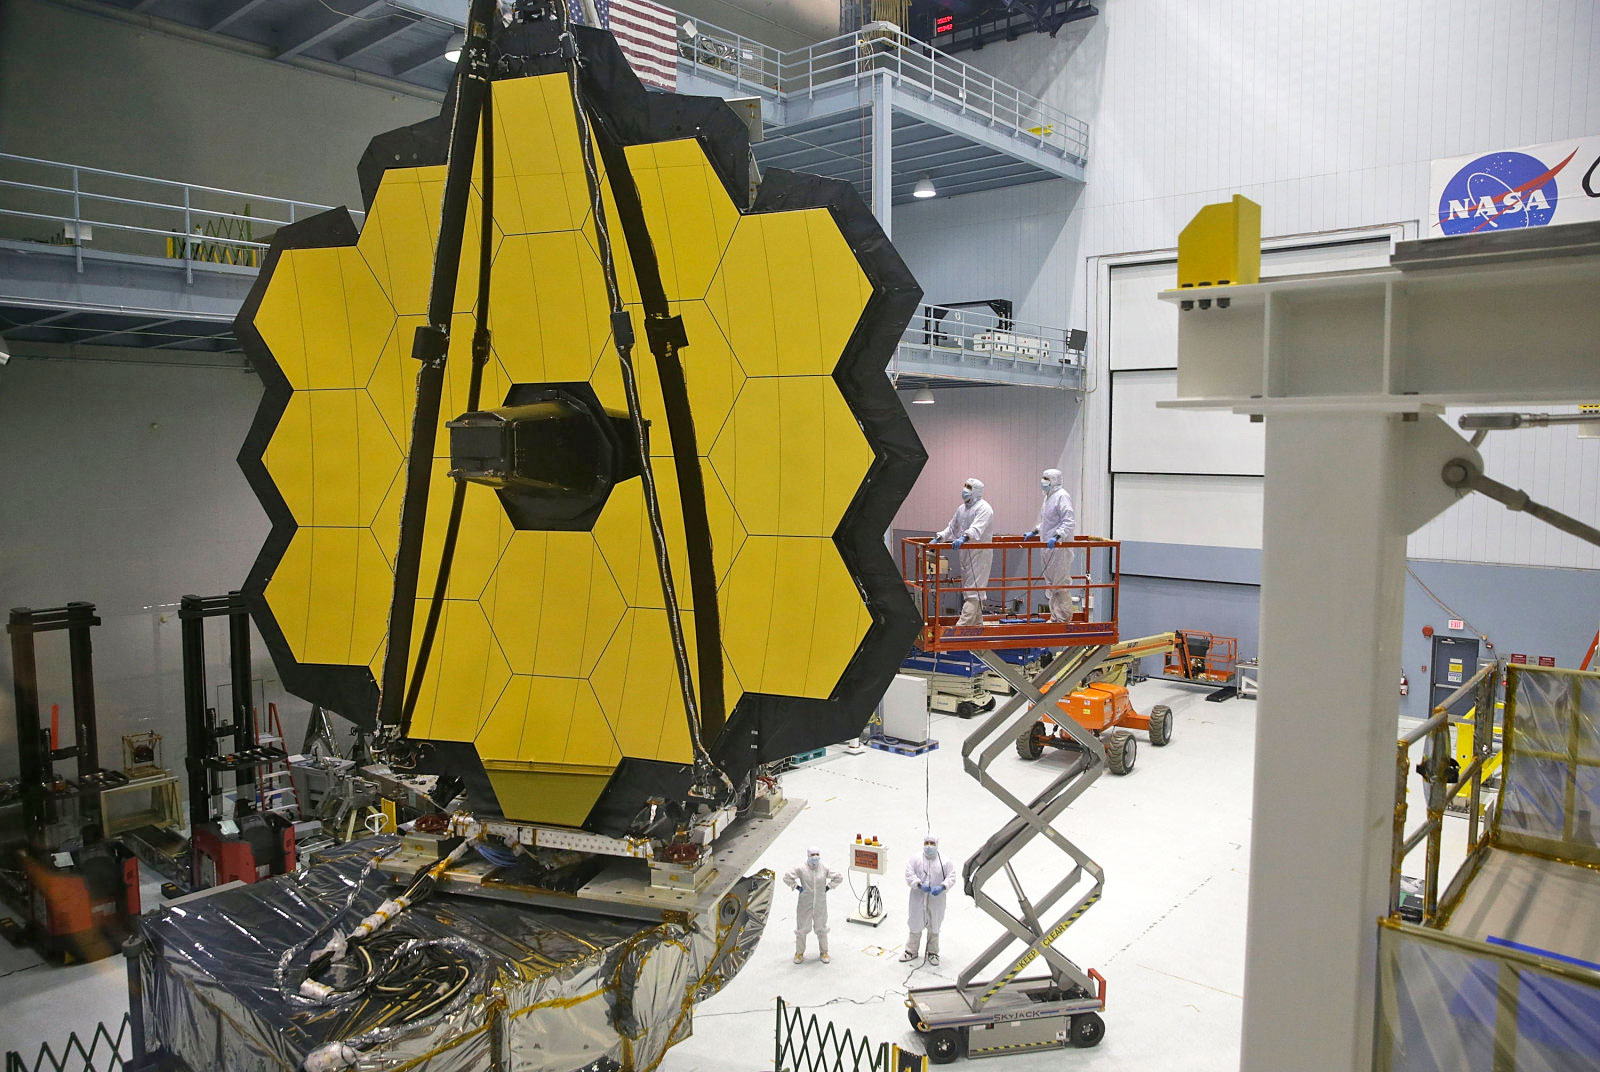 NASA has completed the $8.7 billion James Webb space telescope